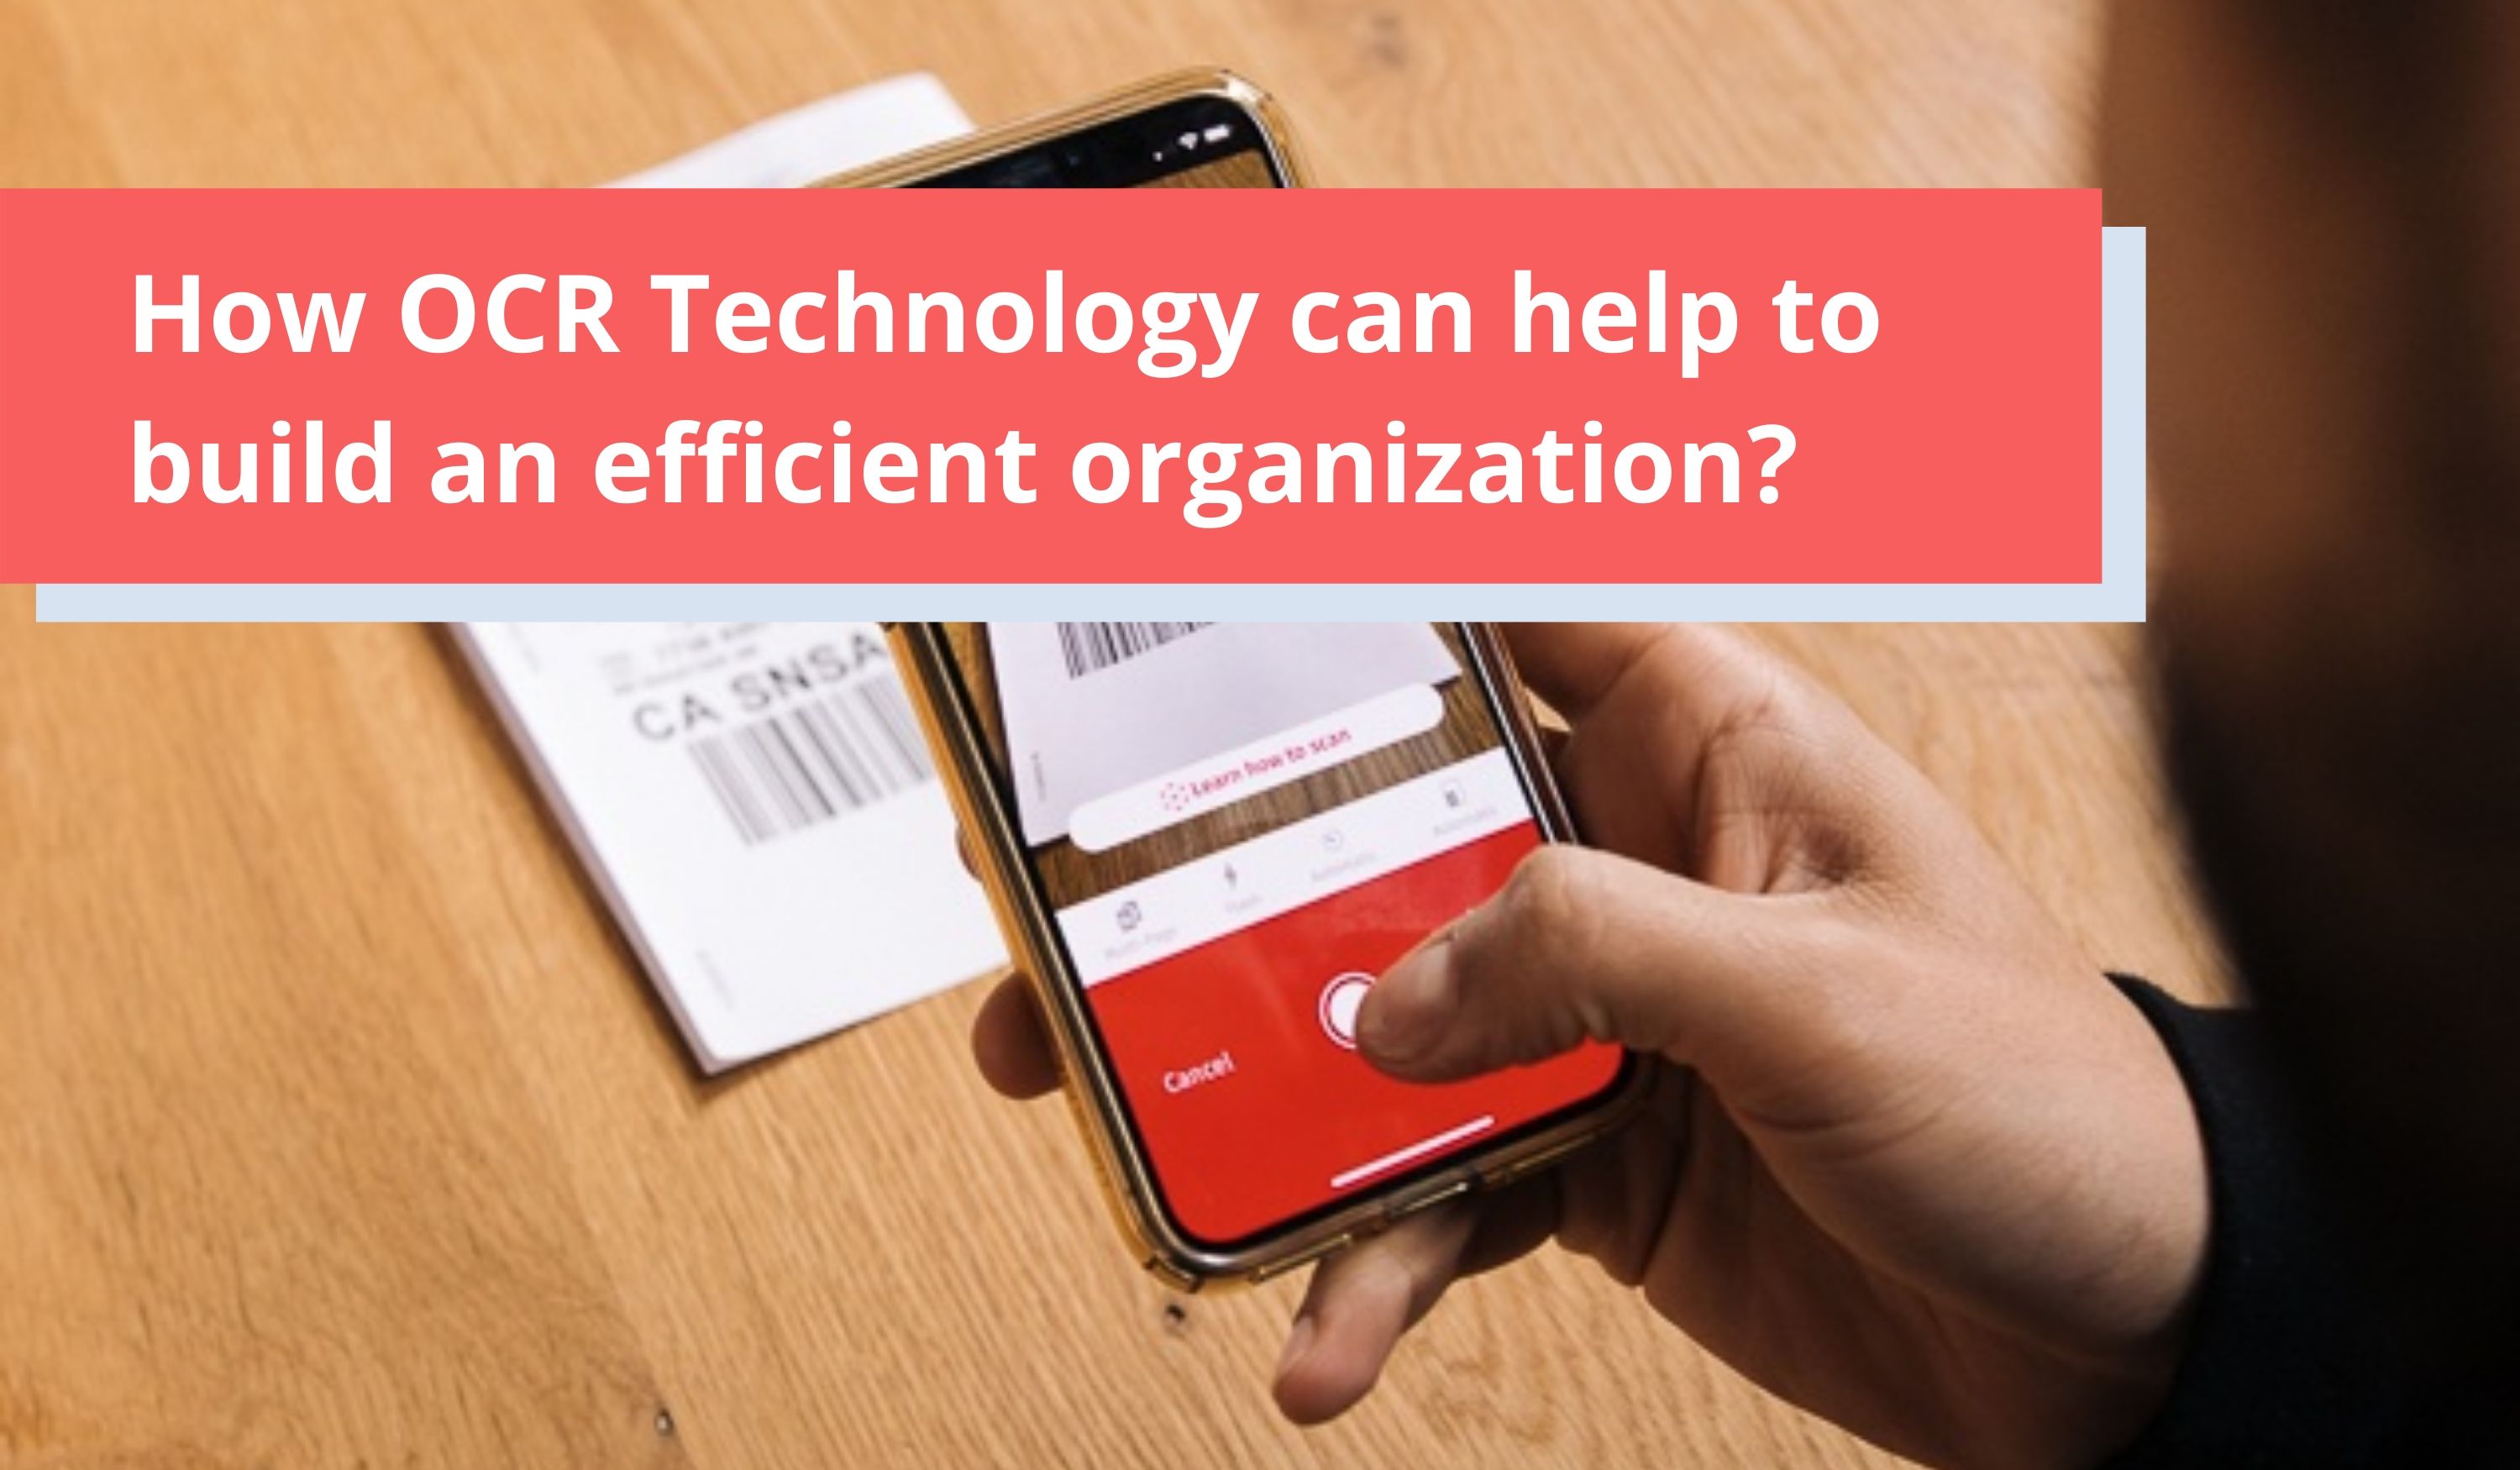 How OCR Technology can help to build an efficient organization